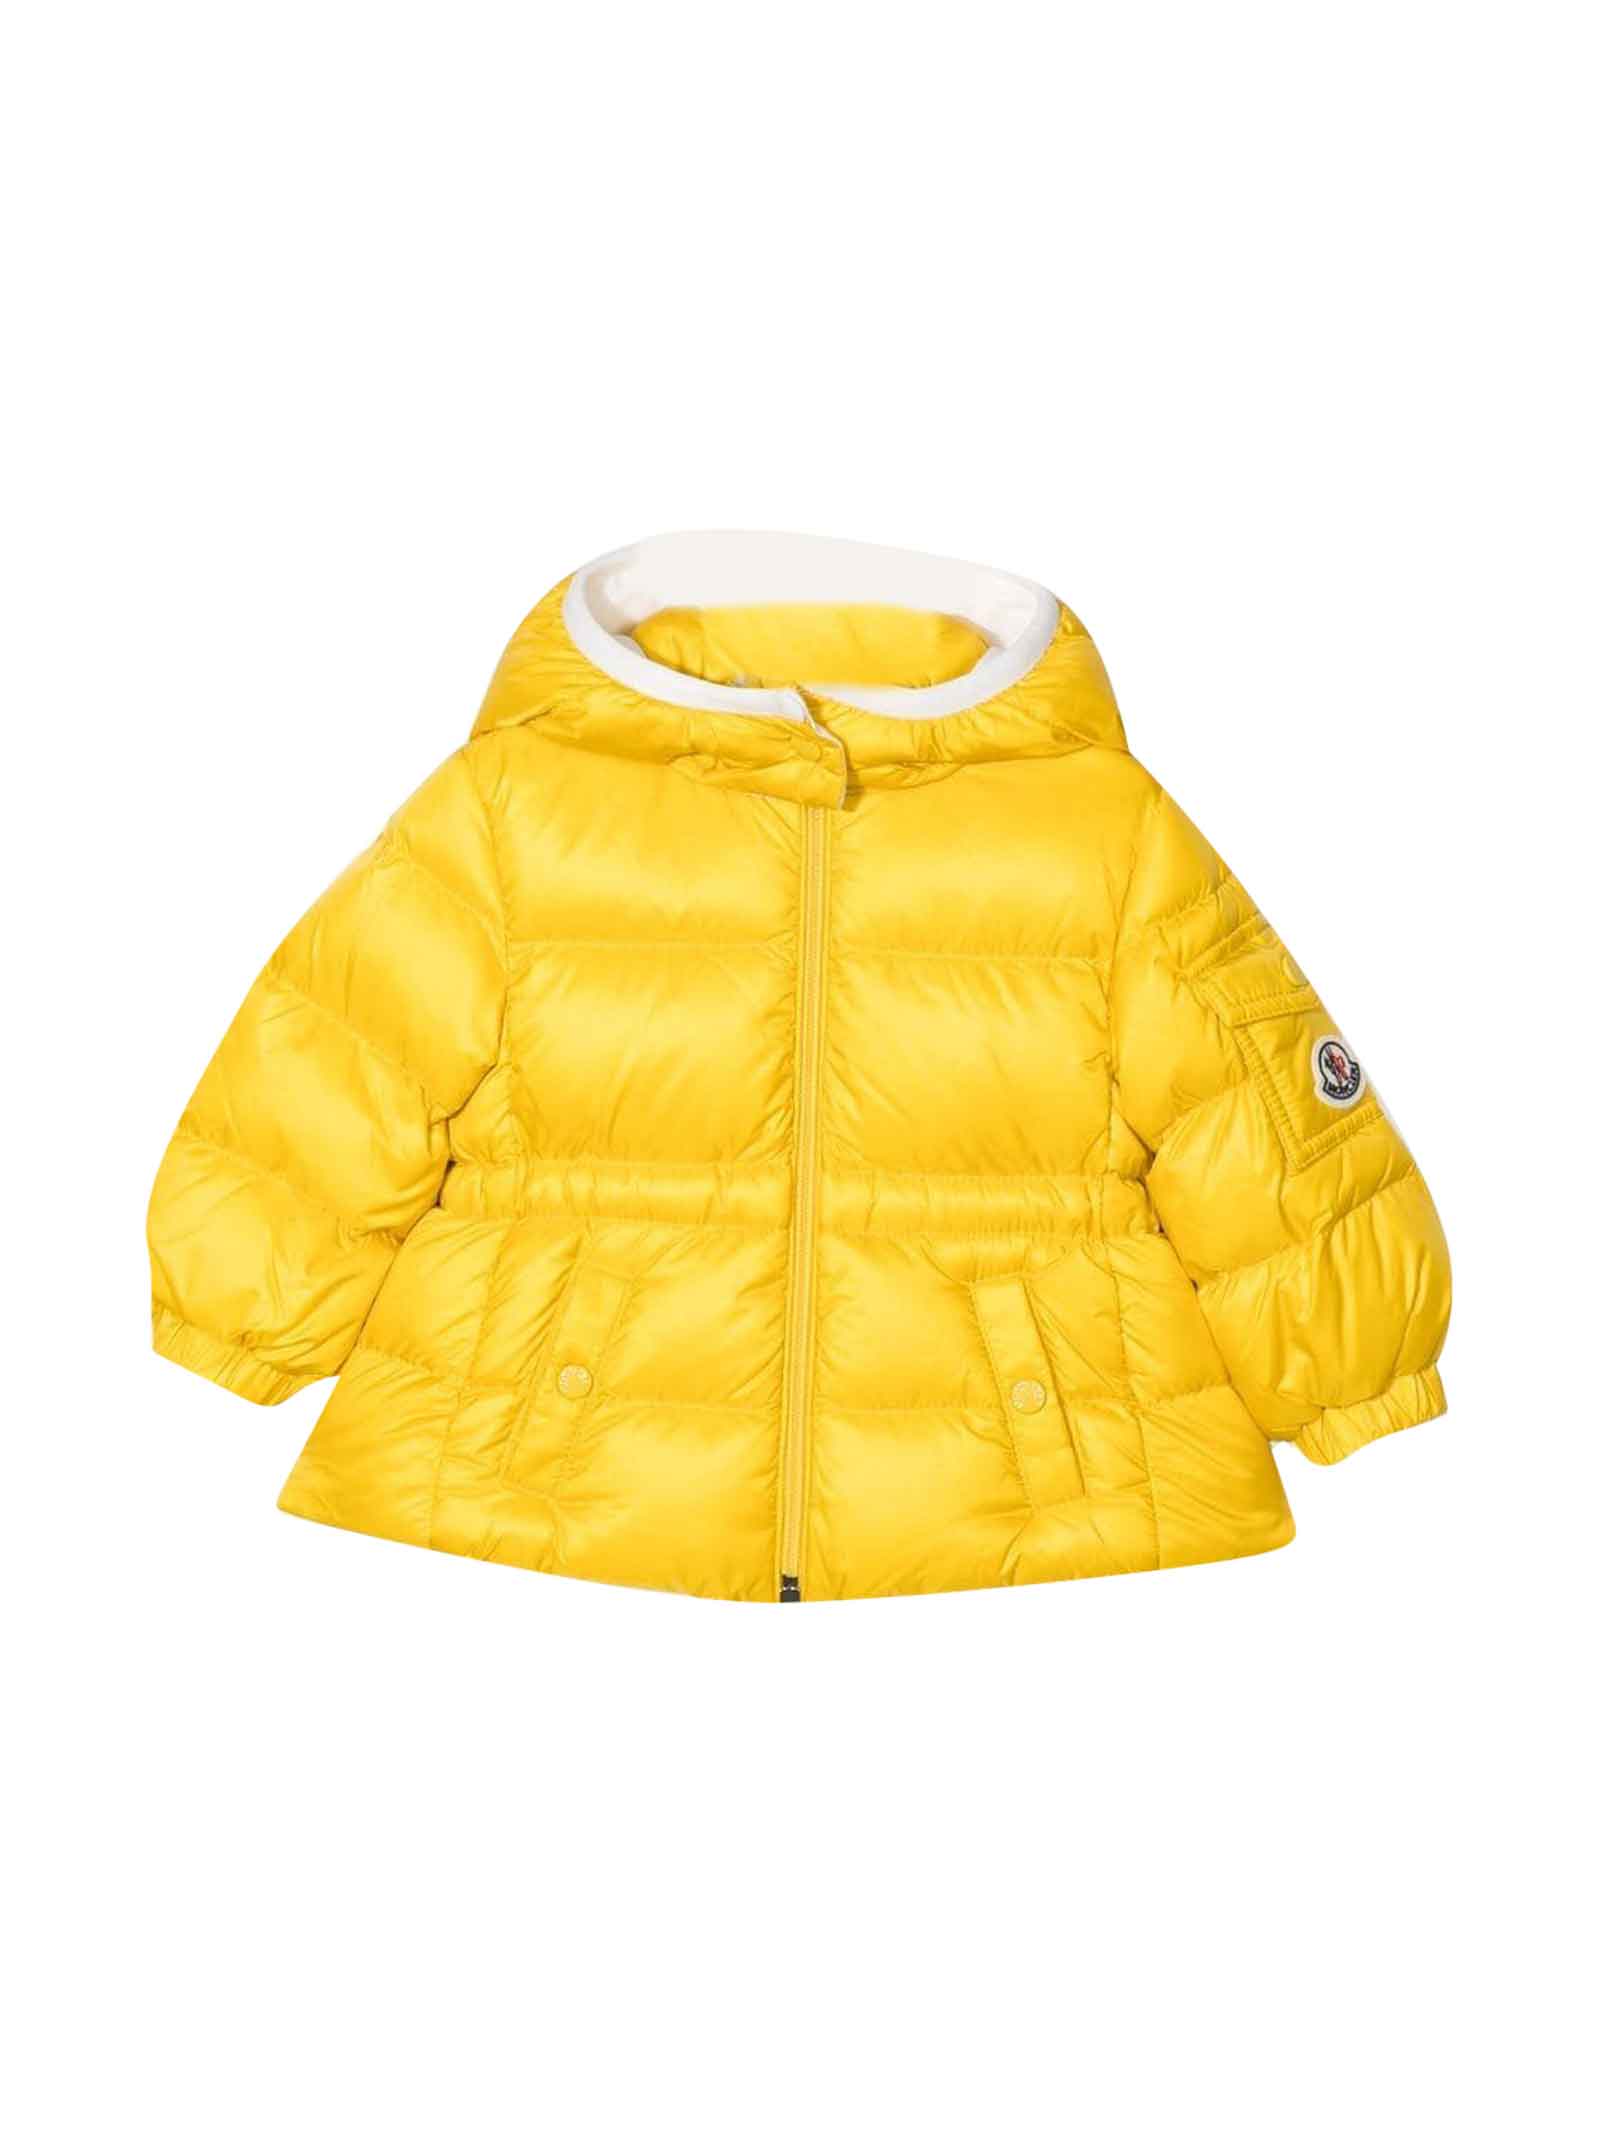 Moncler Yellow Down Jacket Baby Unisex